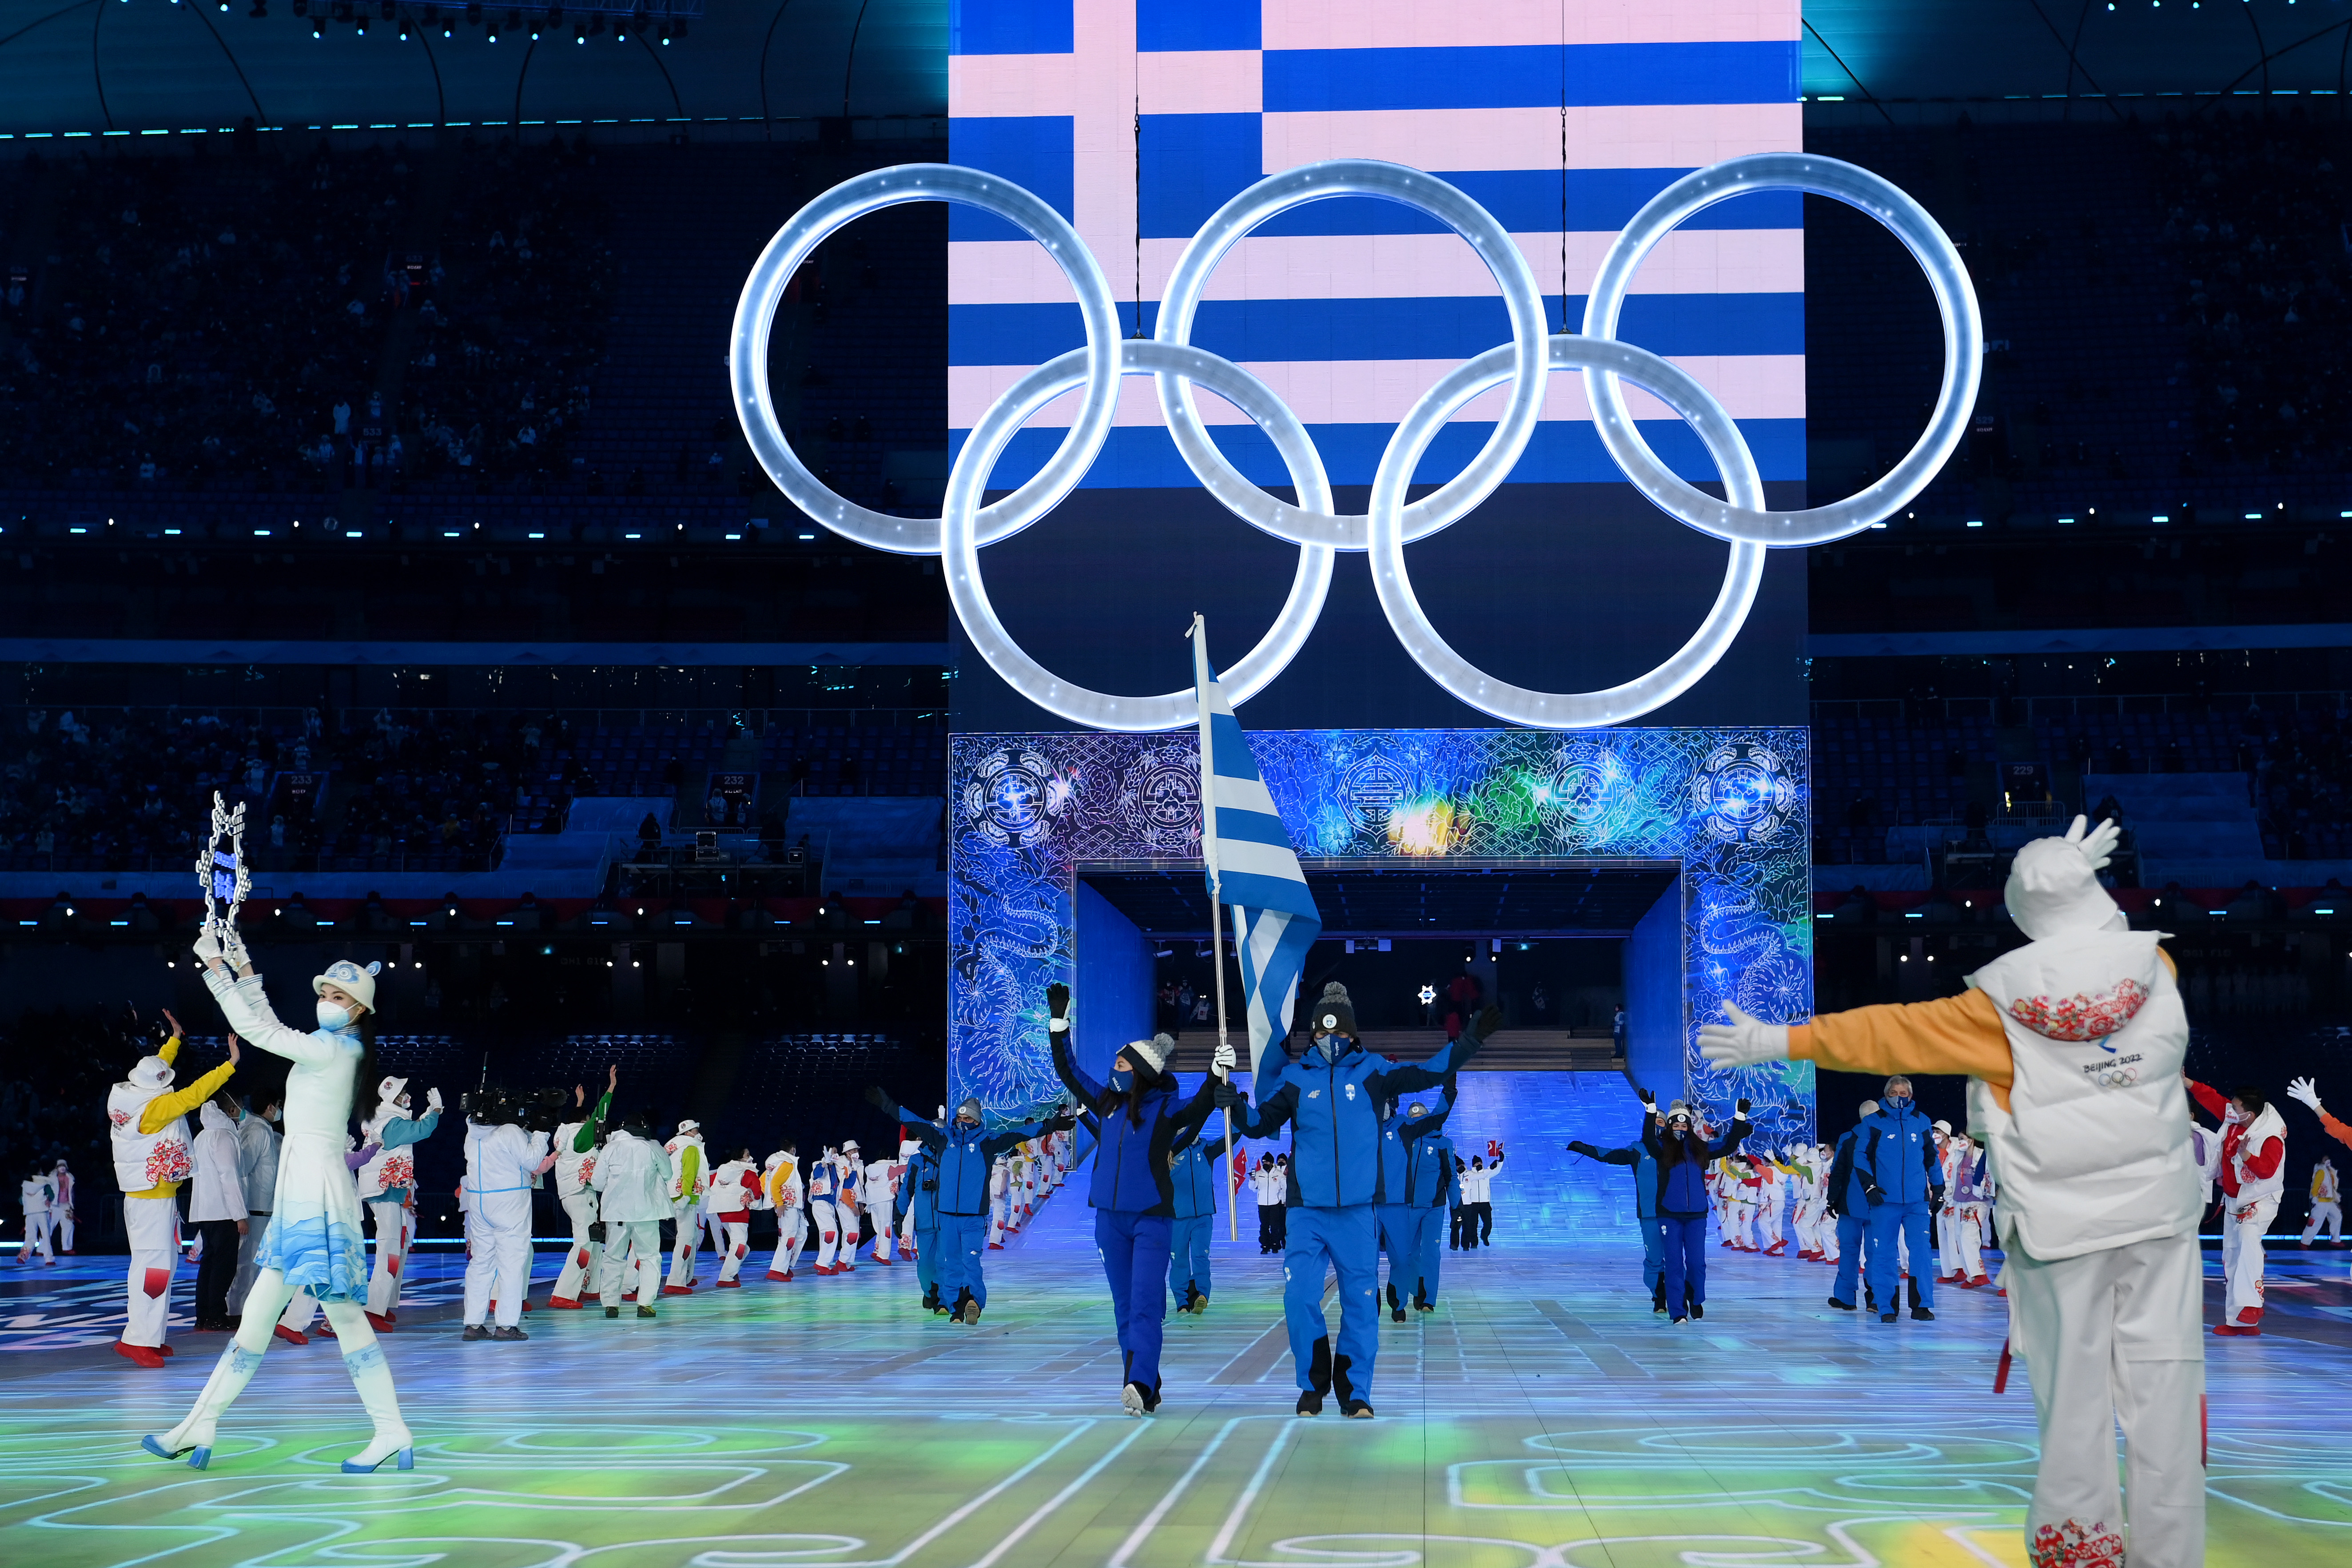 Flag bearers Apostolos Angelis and Maria Ntanou of Team Greece carry their flag during the Opening Ceremony of the Beijing 2022 Winter Olympics at the Beijing National Stadium on February 04 in Beijing, China